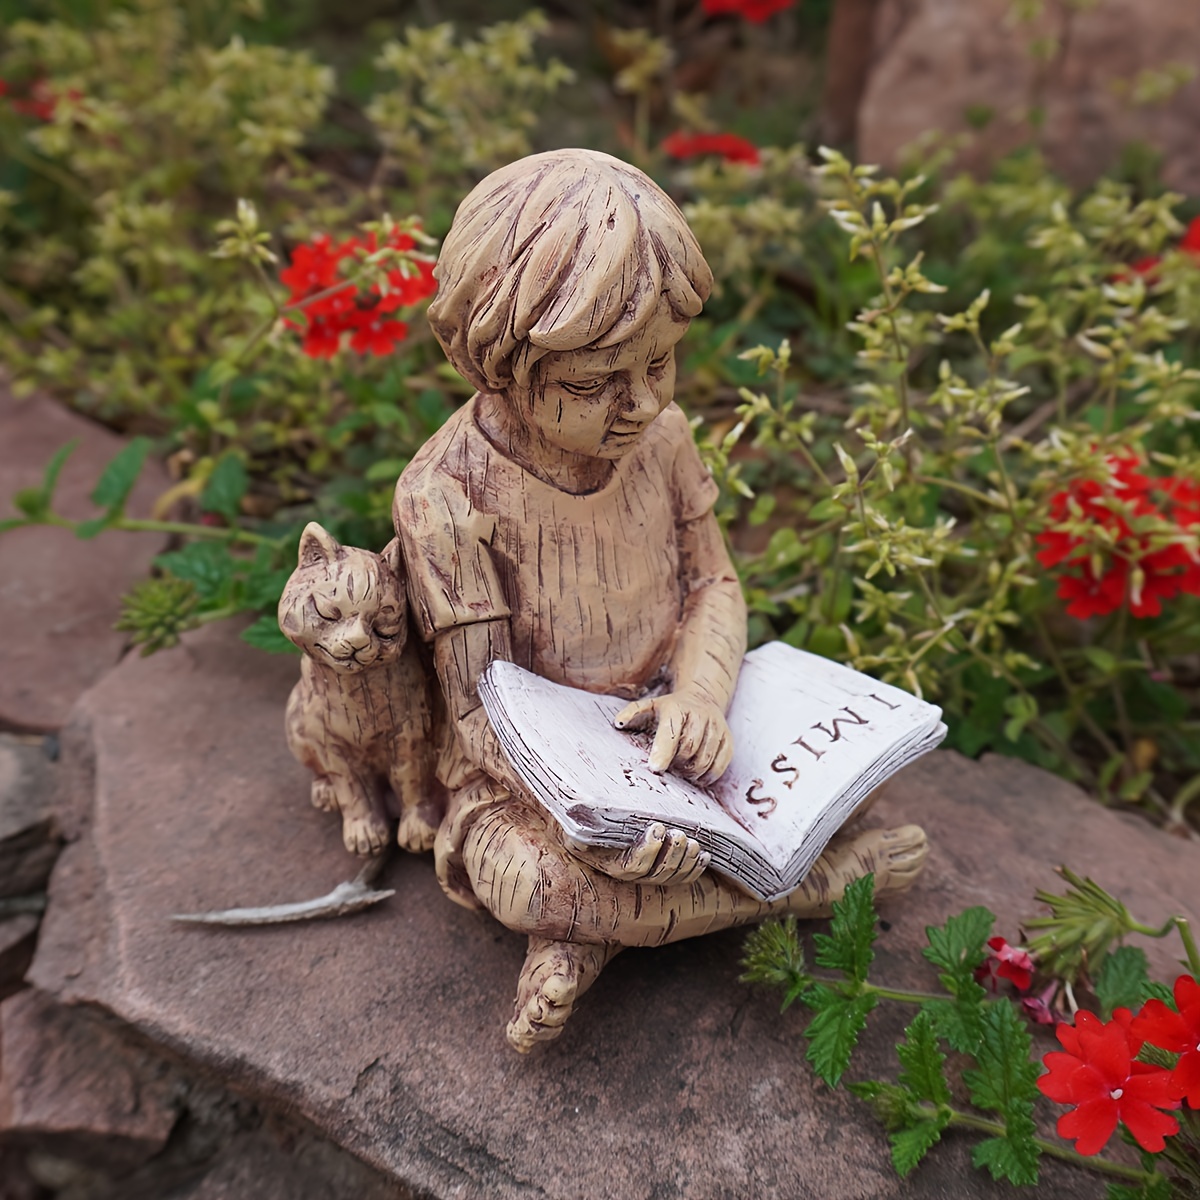 

Charming Reading Boy & Cat Statue - Resin Garden Ornament, Perfect For Outdoor Decor, Thanksgiving Theme